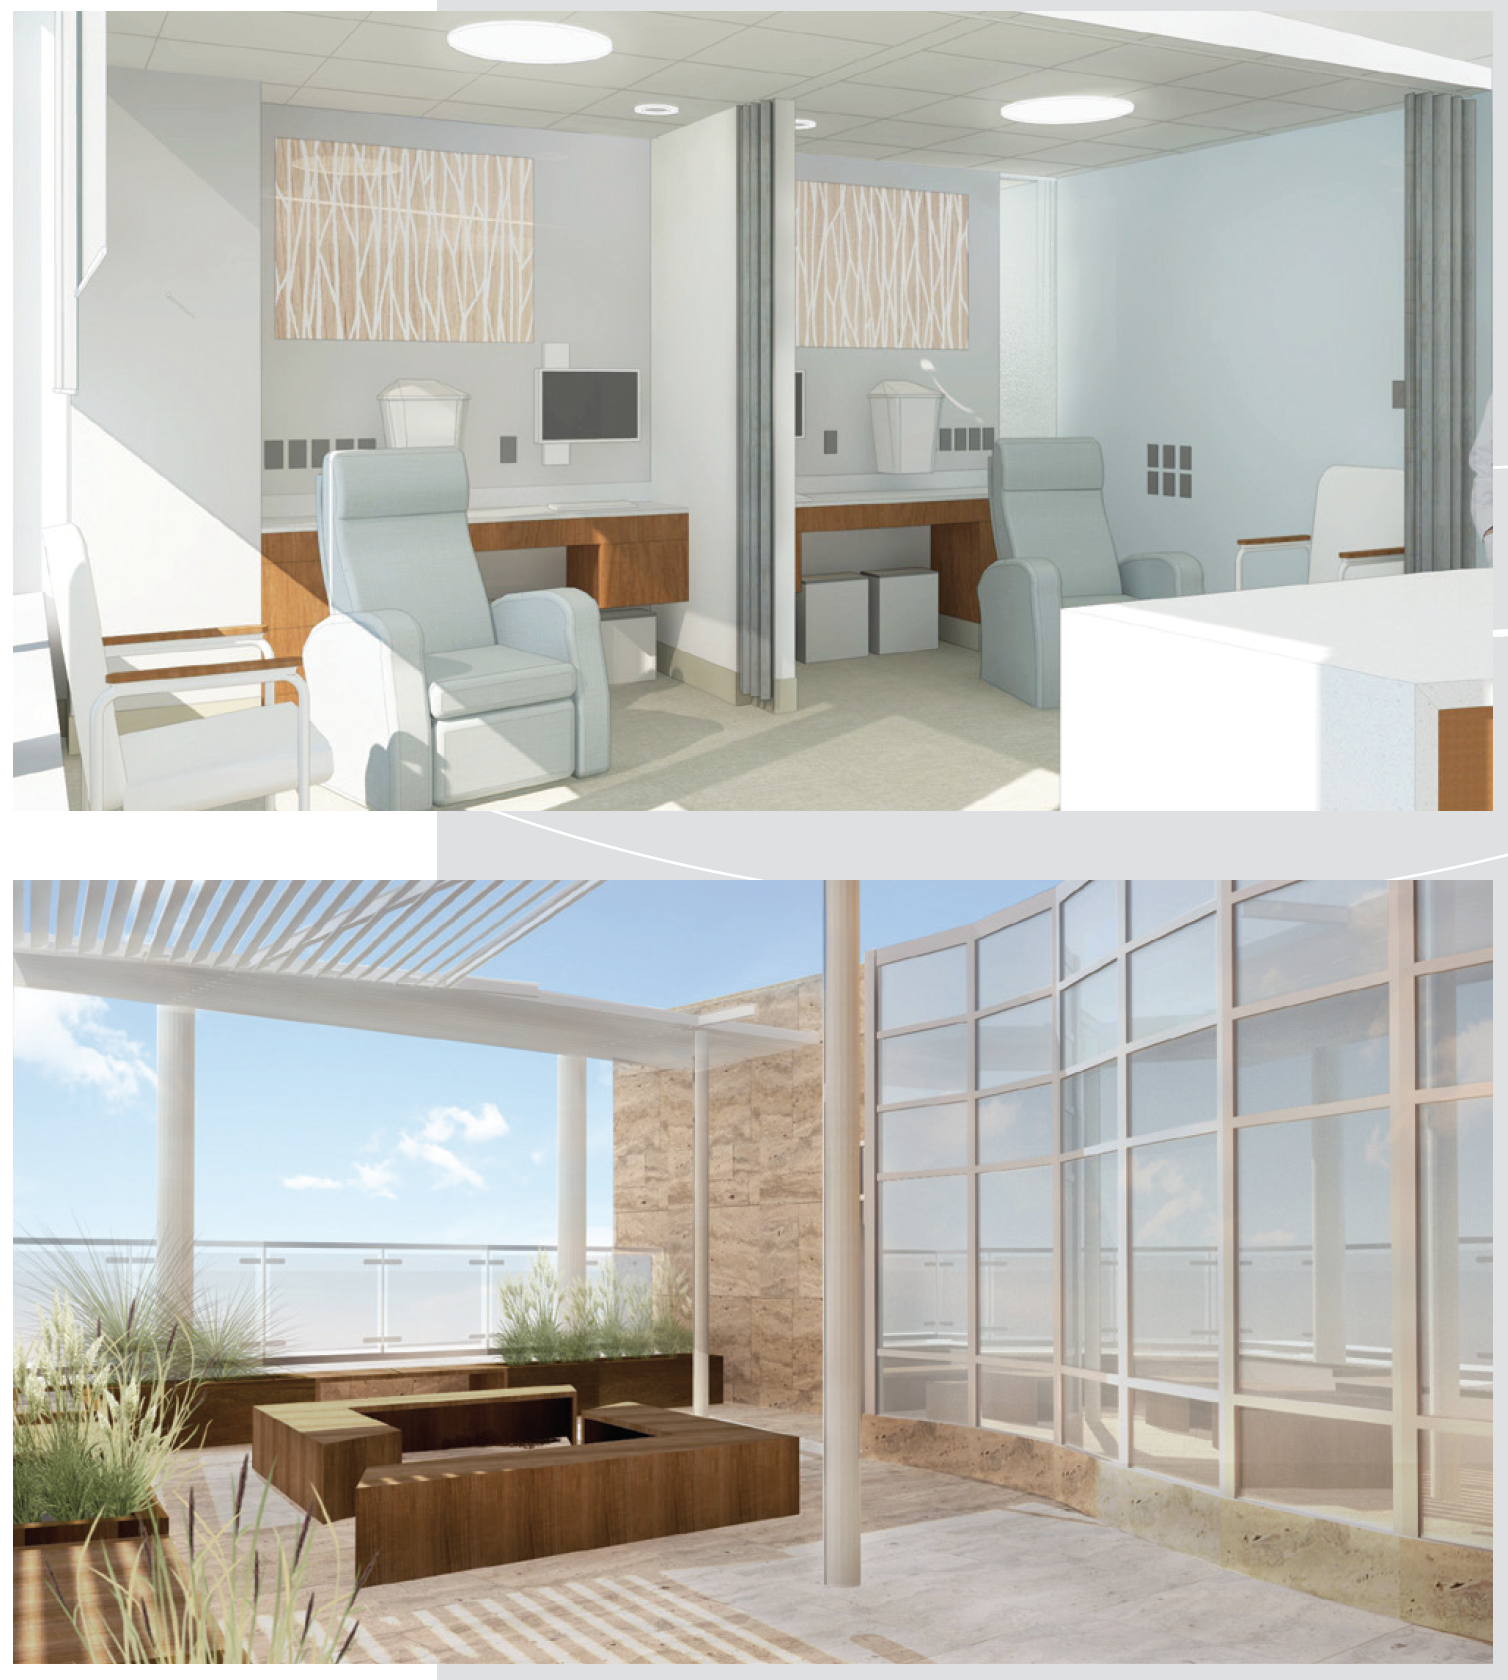 renderings of a new infusion space in the cancer center and a new balcony space